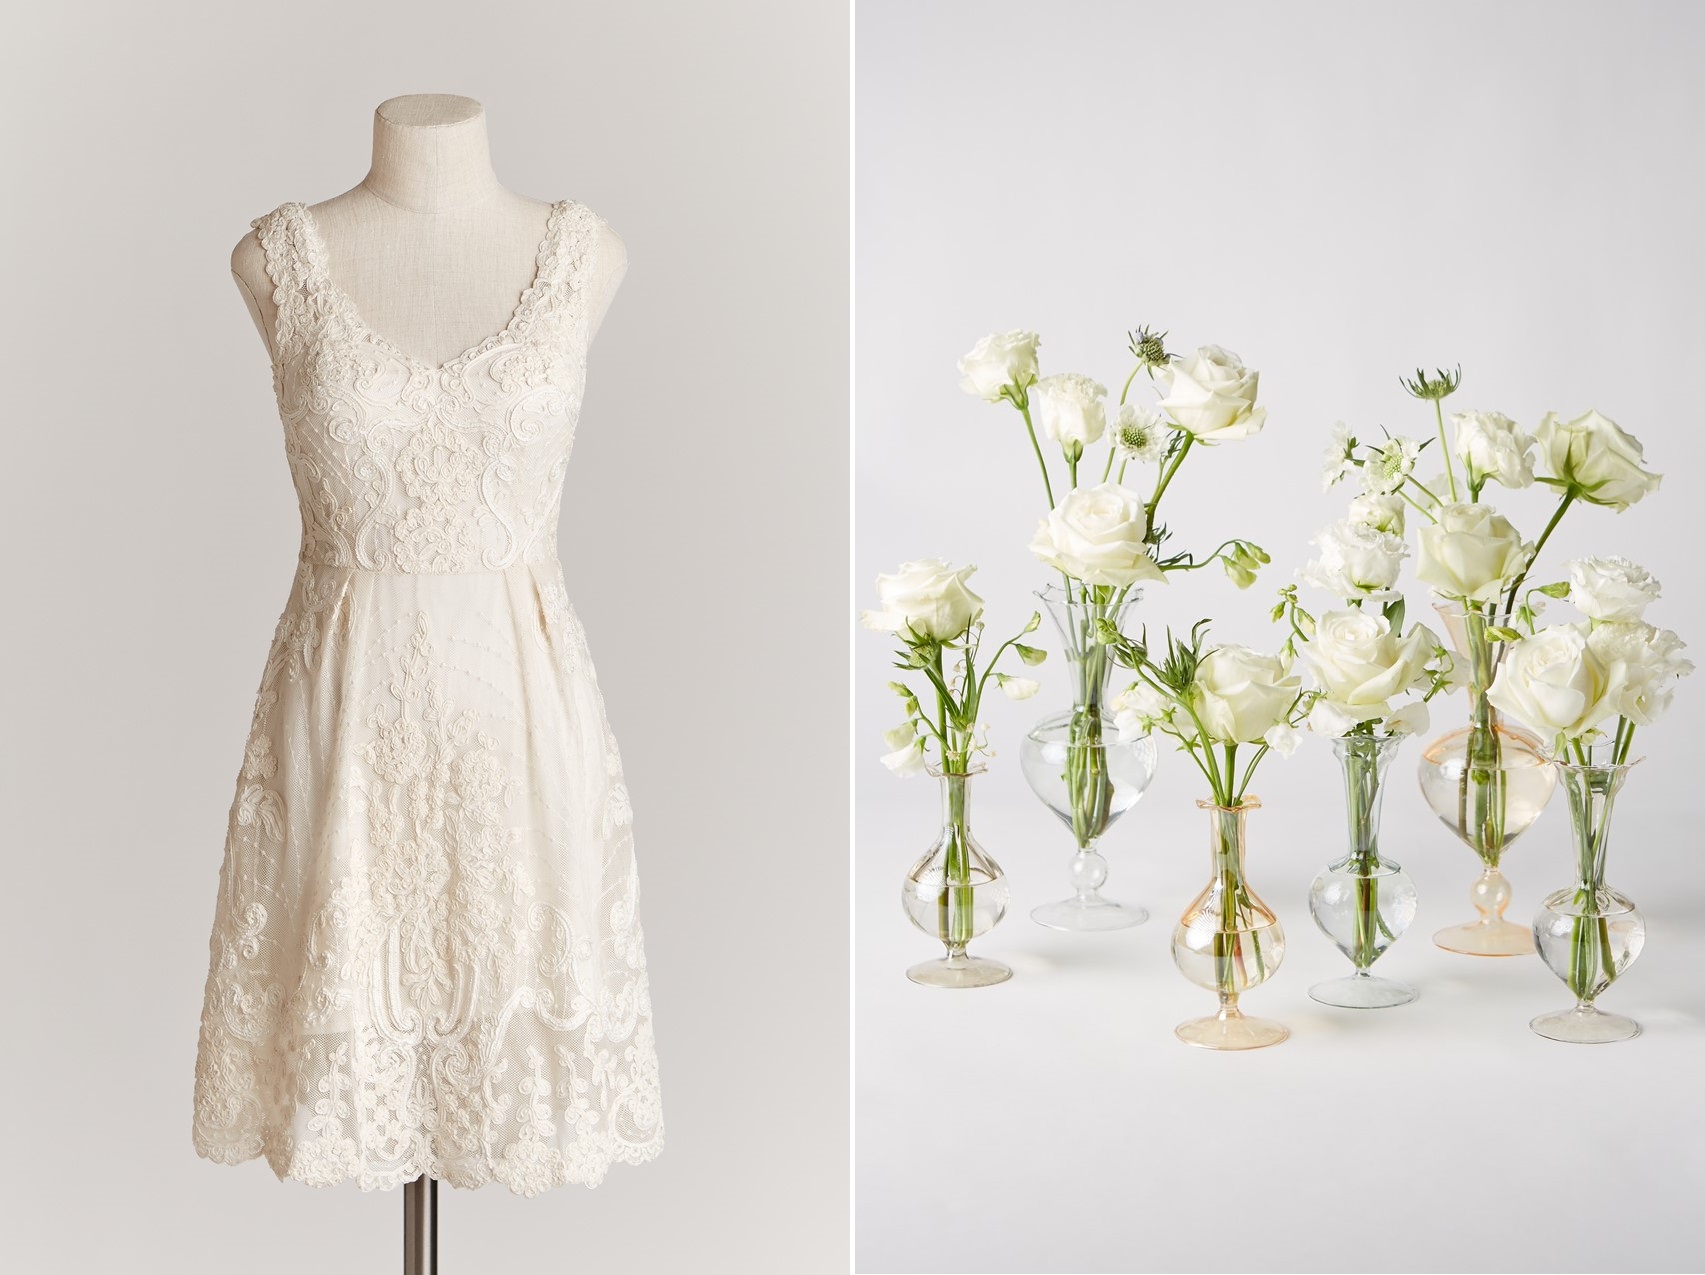 Bridesmaid Dress and Parfumerie Vases from BHLDN Fall 2015 Collection ‘Twice Enchanted’